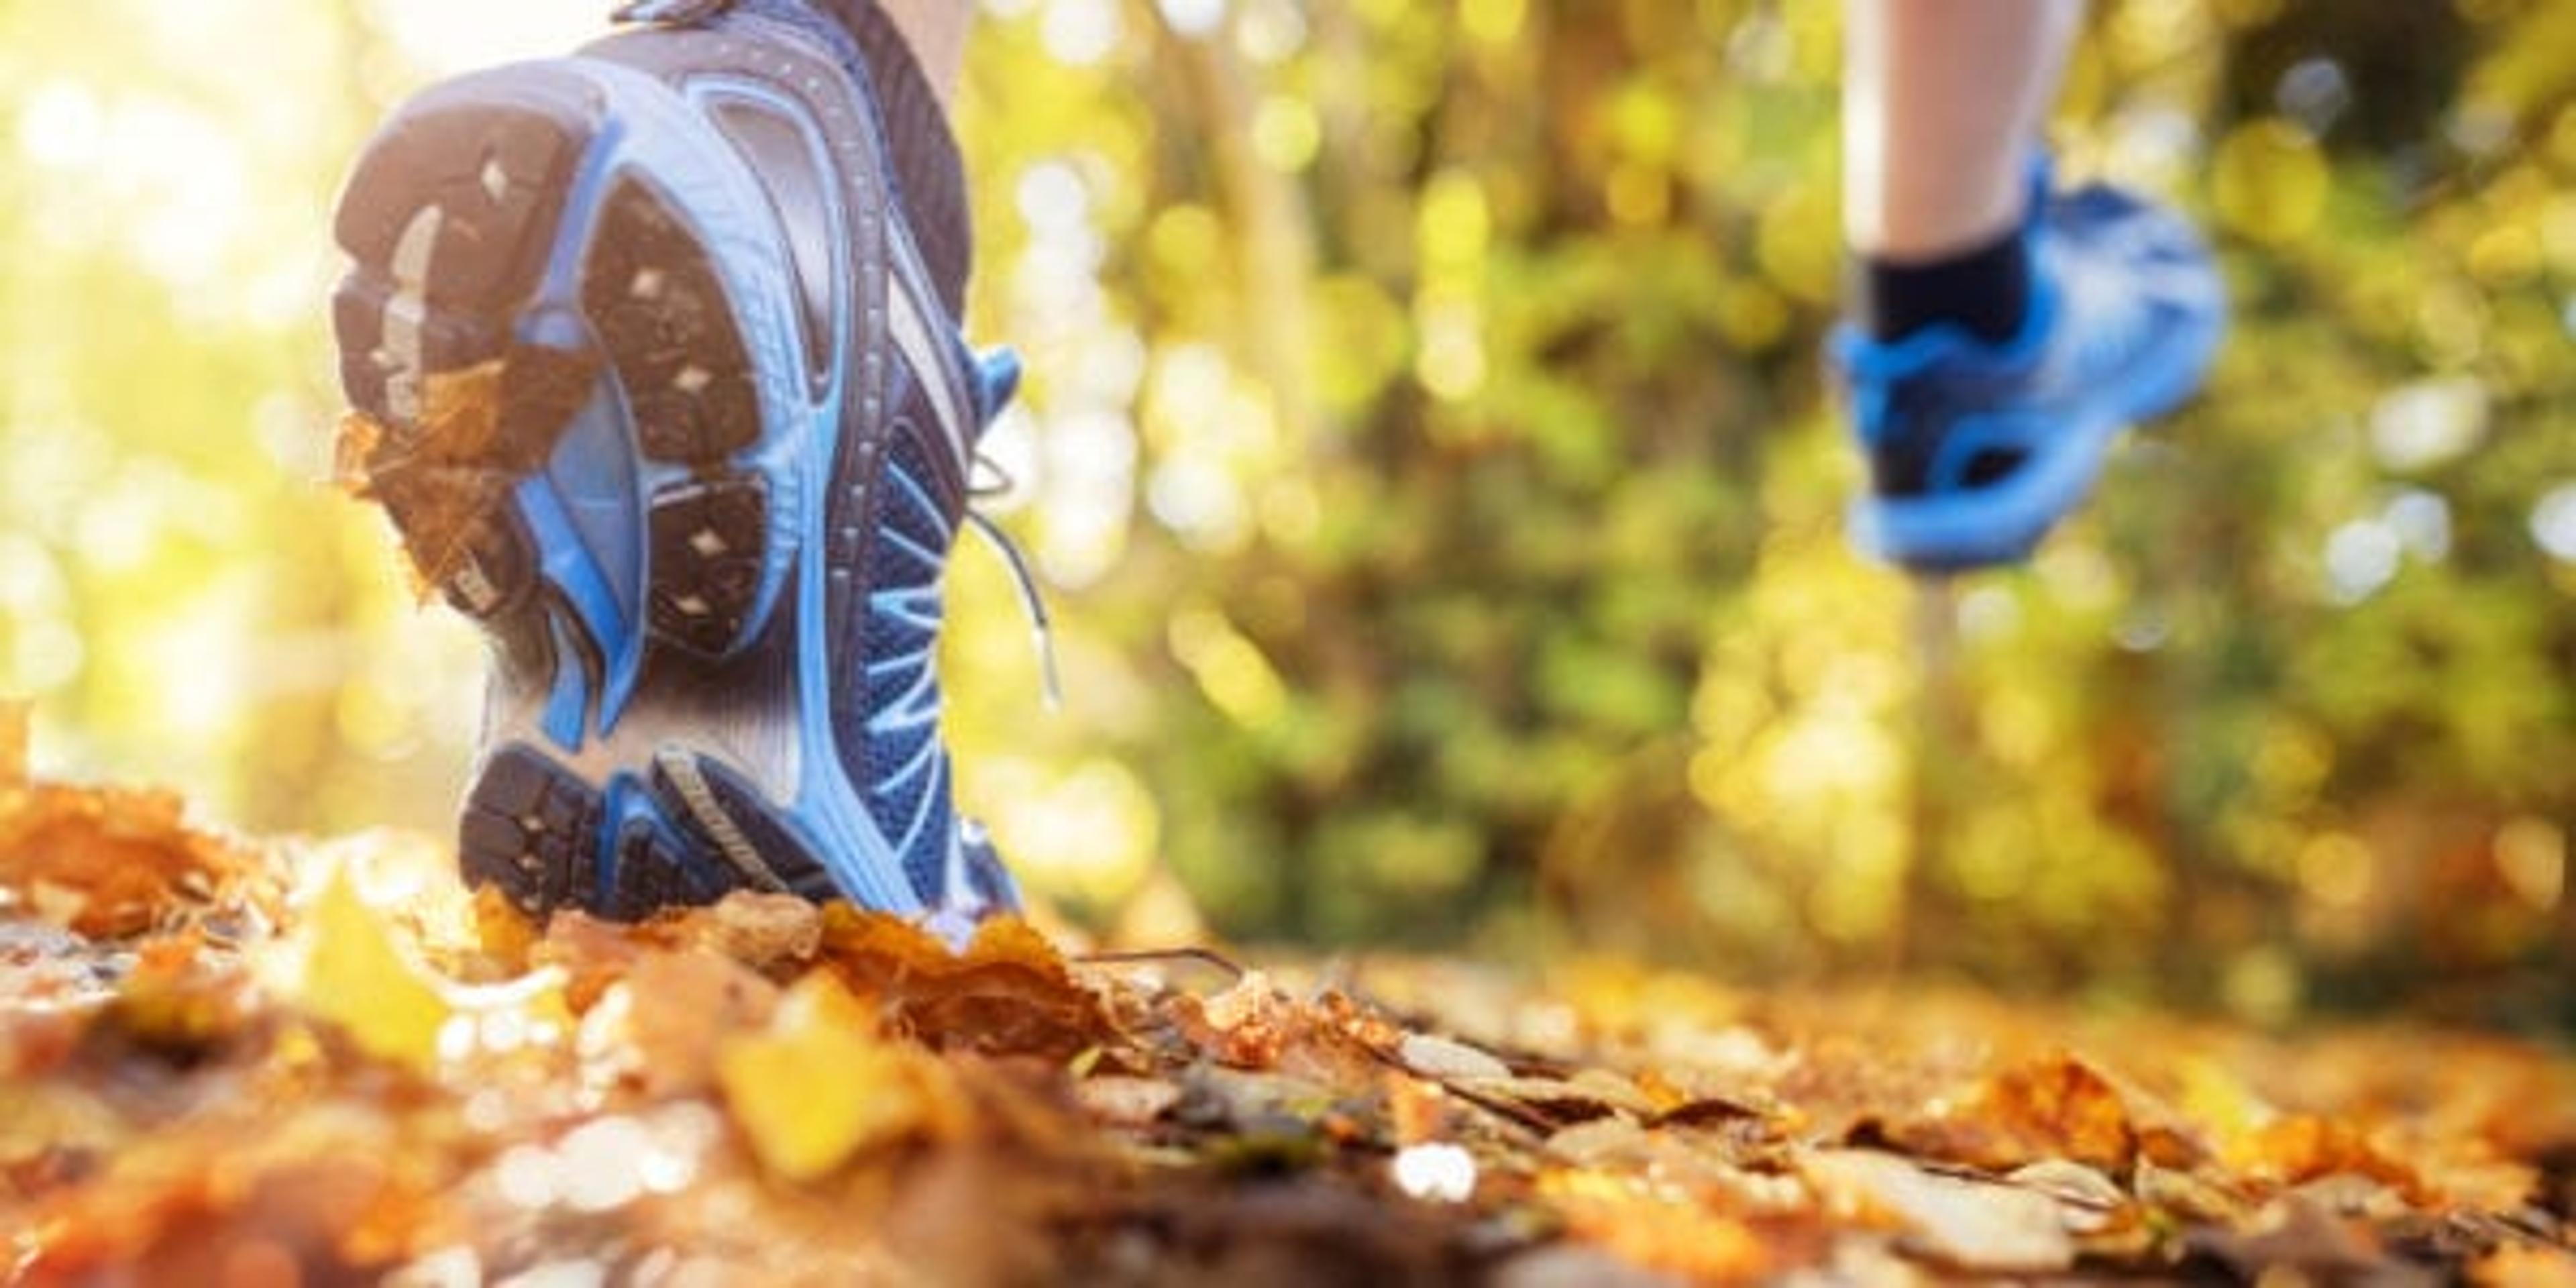 Image of a runner crunching through fall leaves.